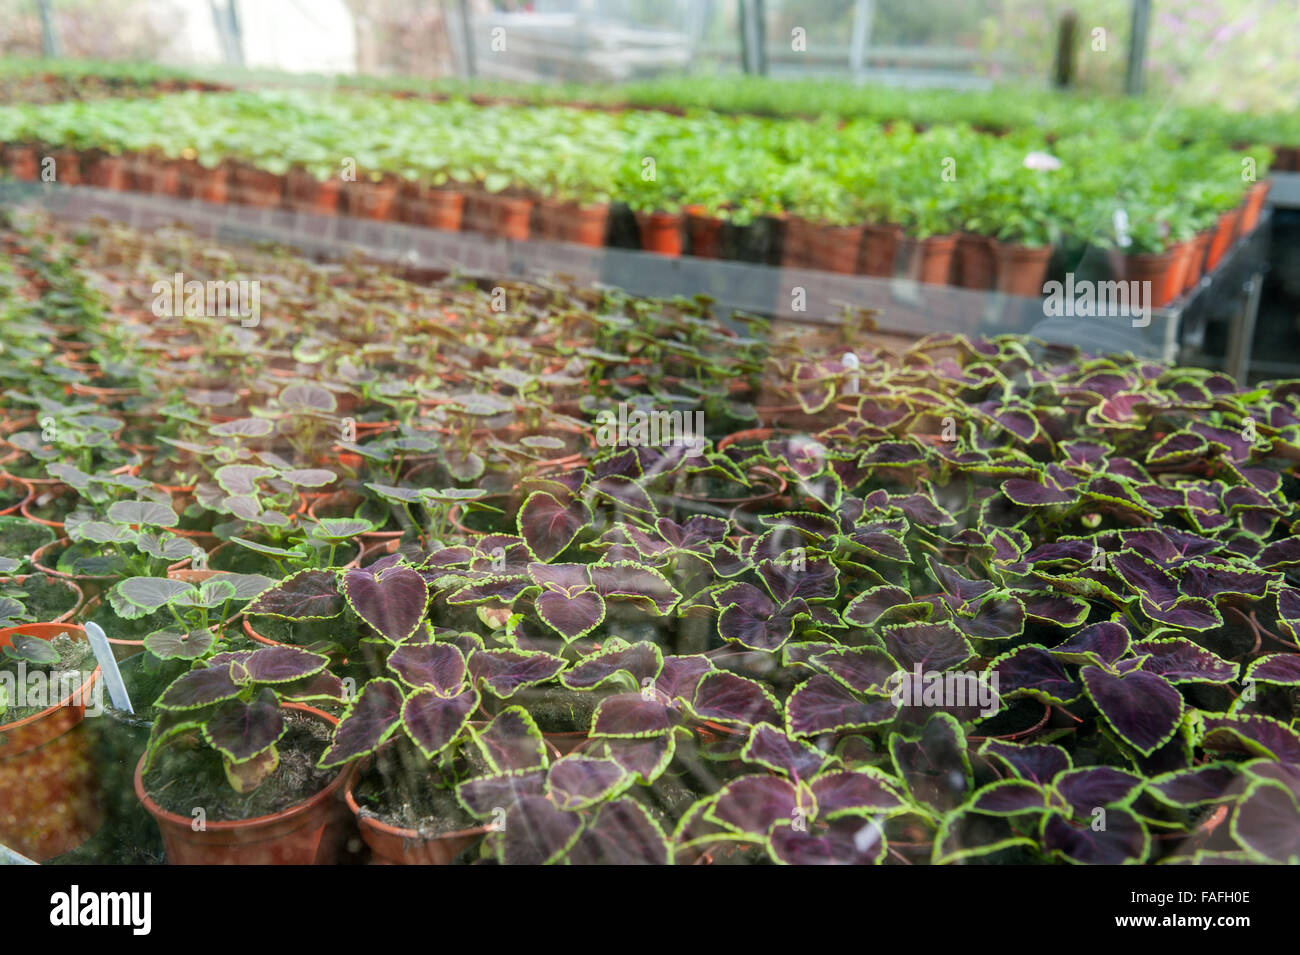 Inside a large industrial green house with plants in pots Stock Photo